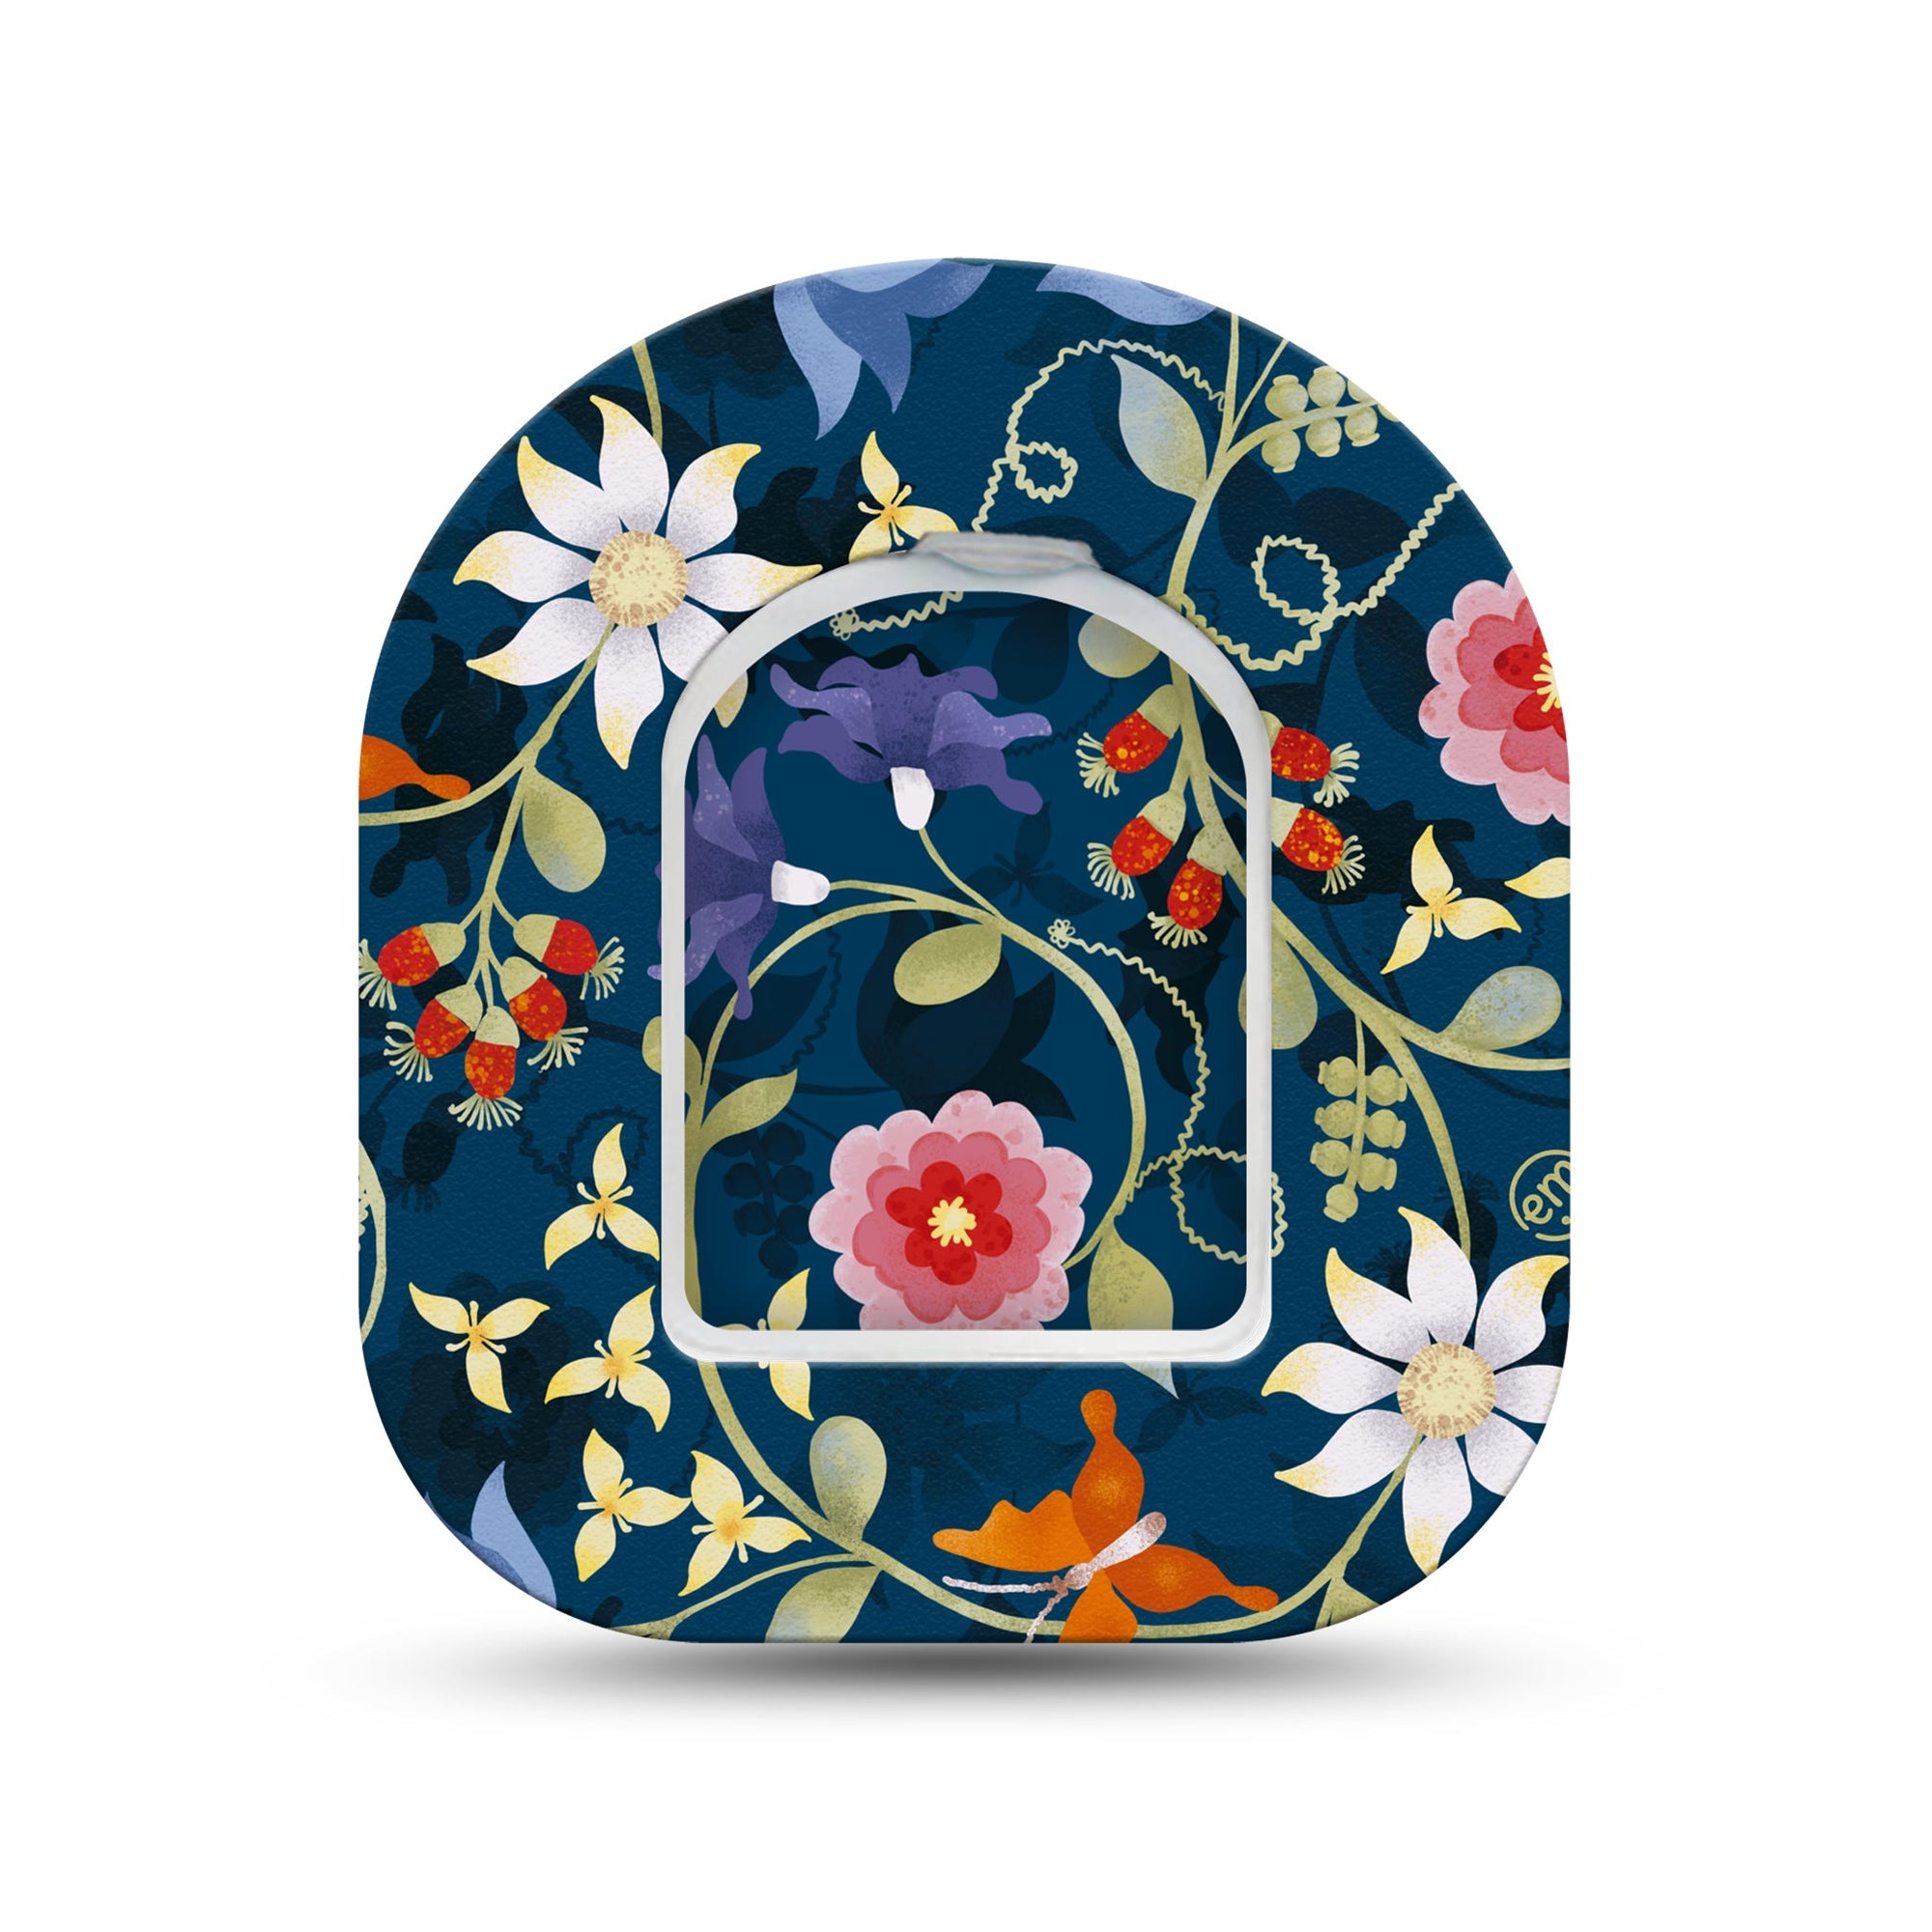 ExpressionMed Floral Folklore Pod Mini Tape Single Sticker and Single Tape, Botanical Myths Adhesive Patch Pump Design